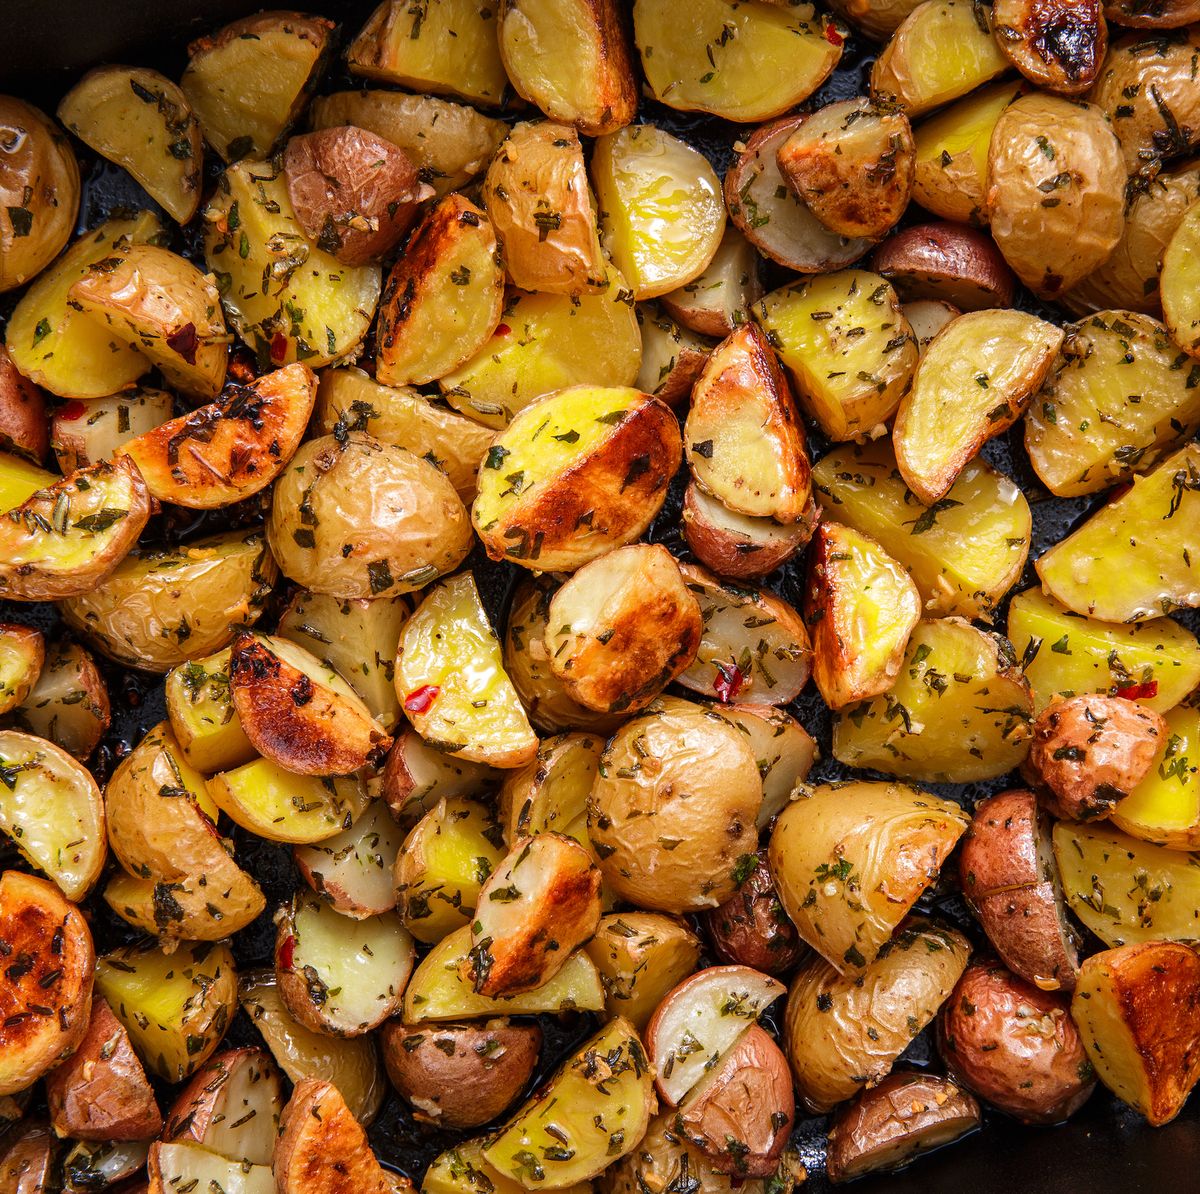 Best Roasted Potatoes Recipe - How To Make Oven Roasted Potatoes